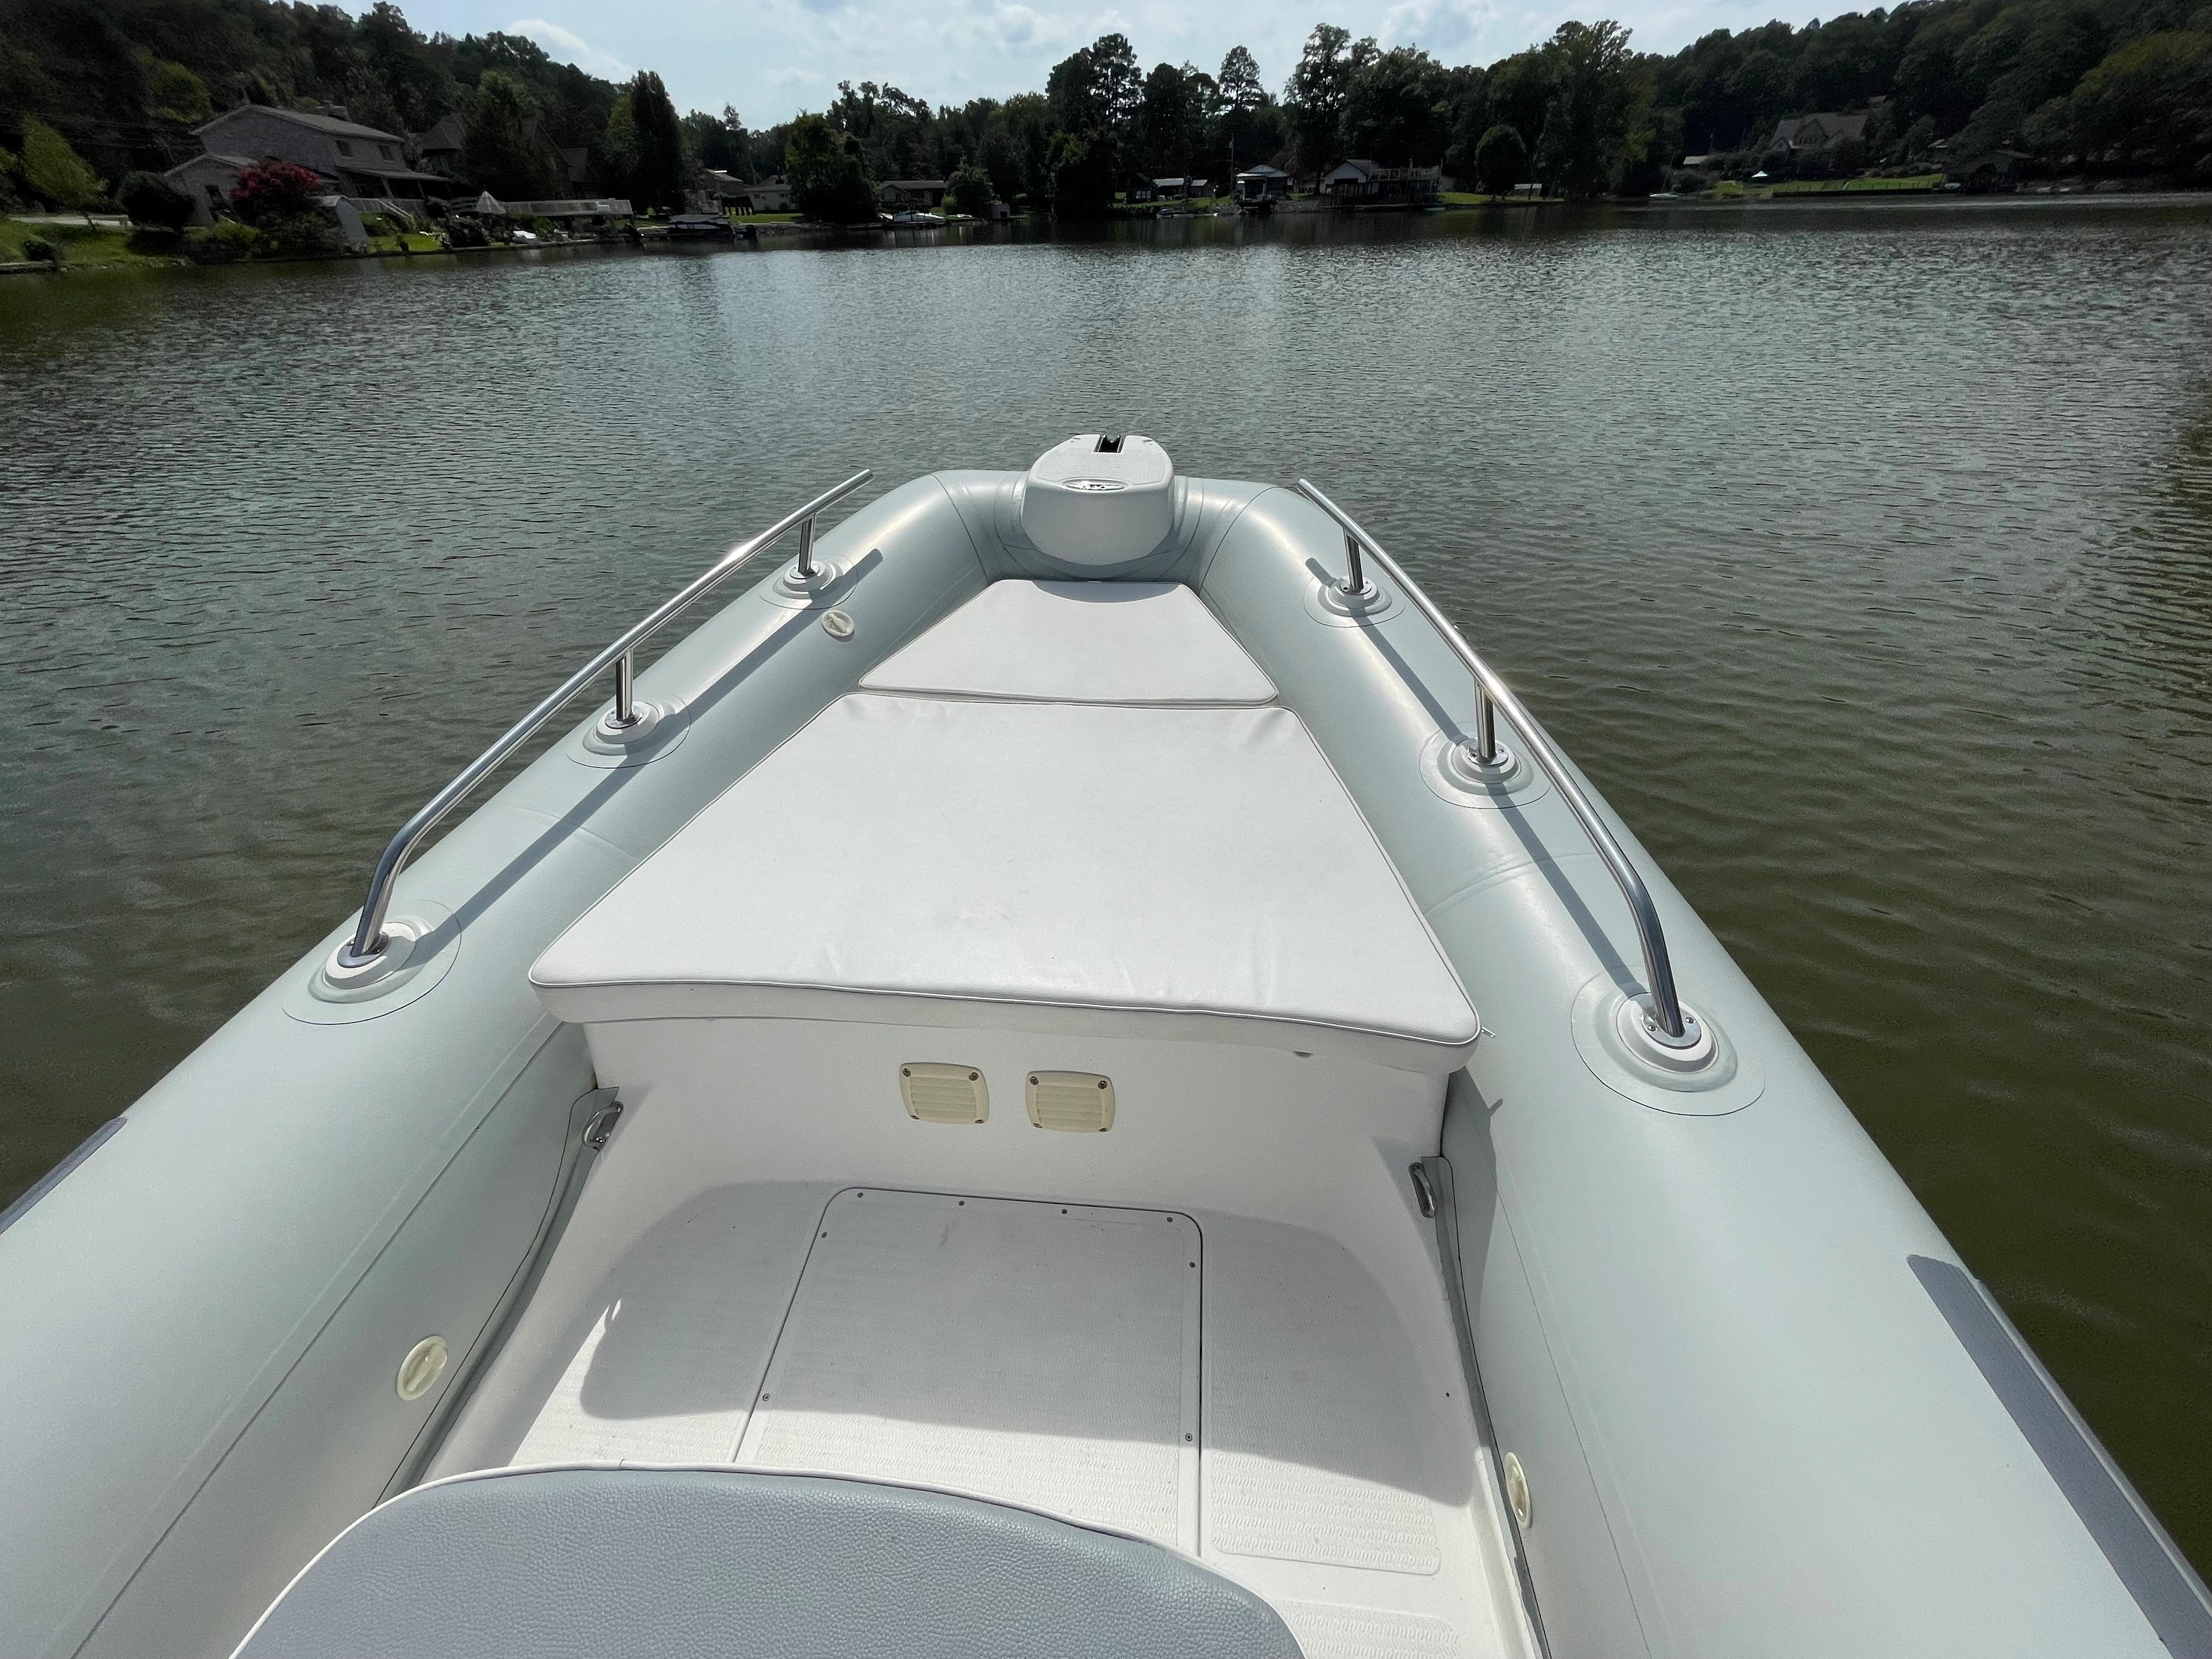 Inflatable Boats for sale in Knoxville, Tennessee